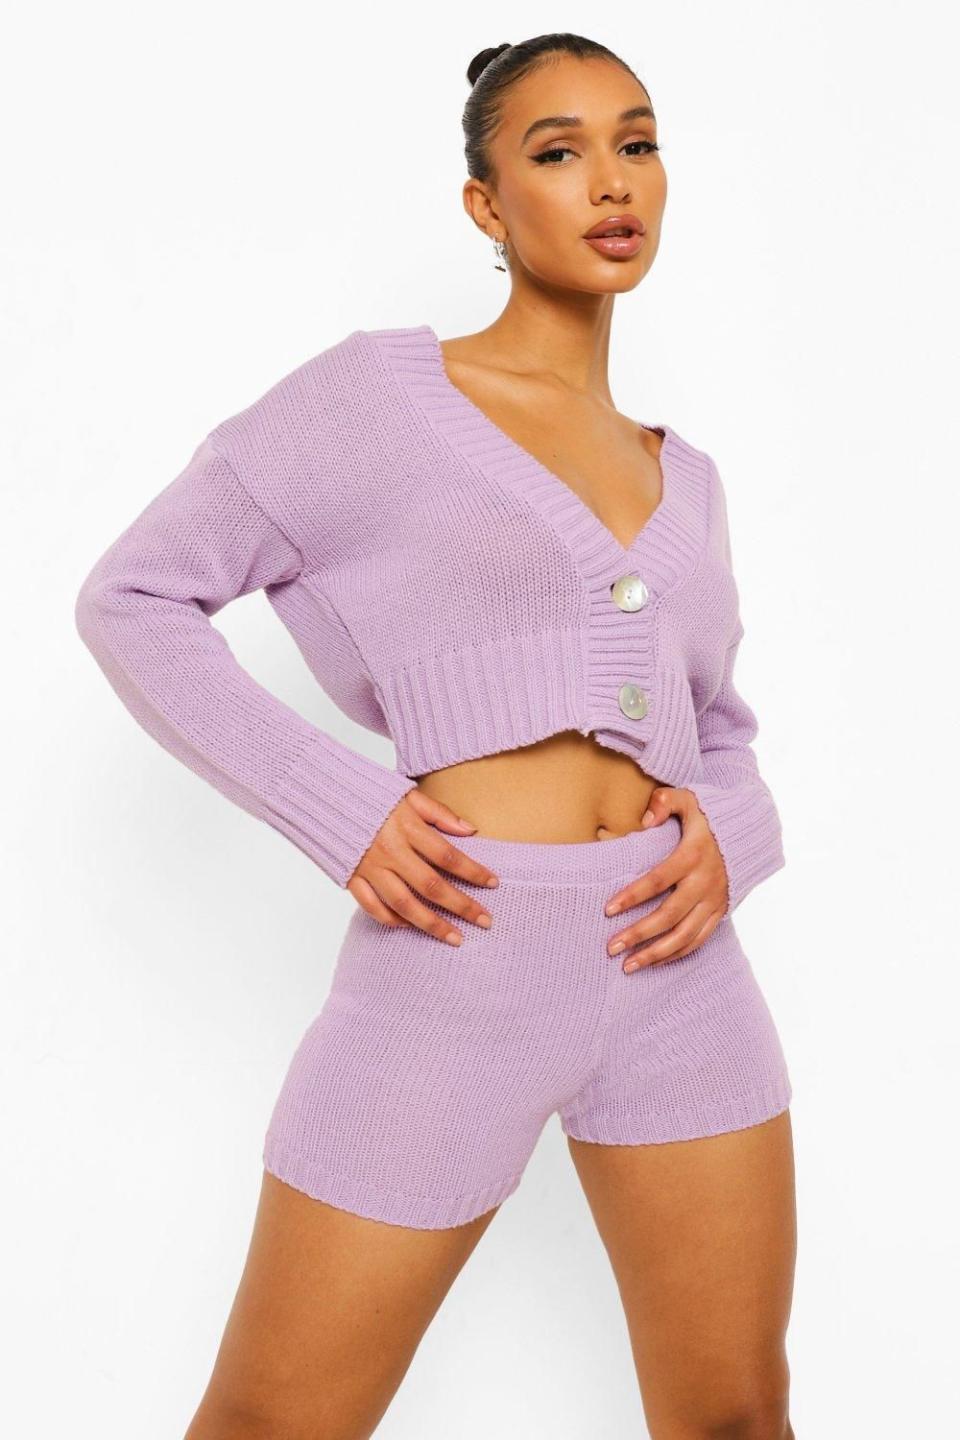 3) Cropped Cardigan and Knitted Short Set